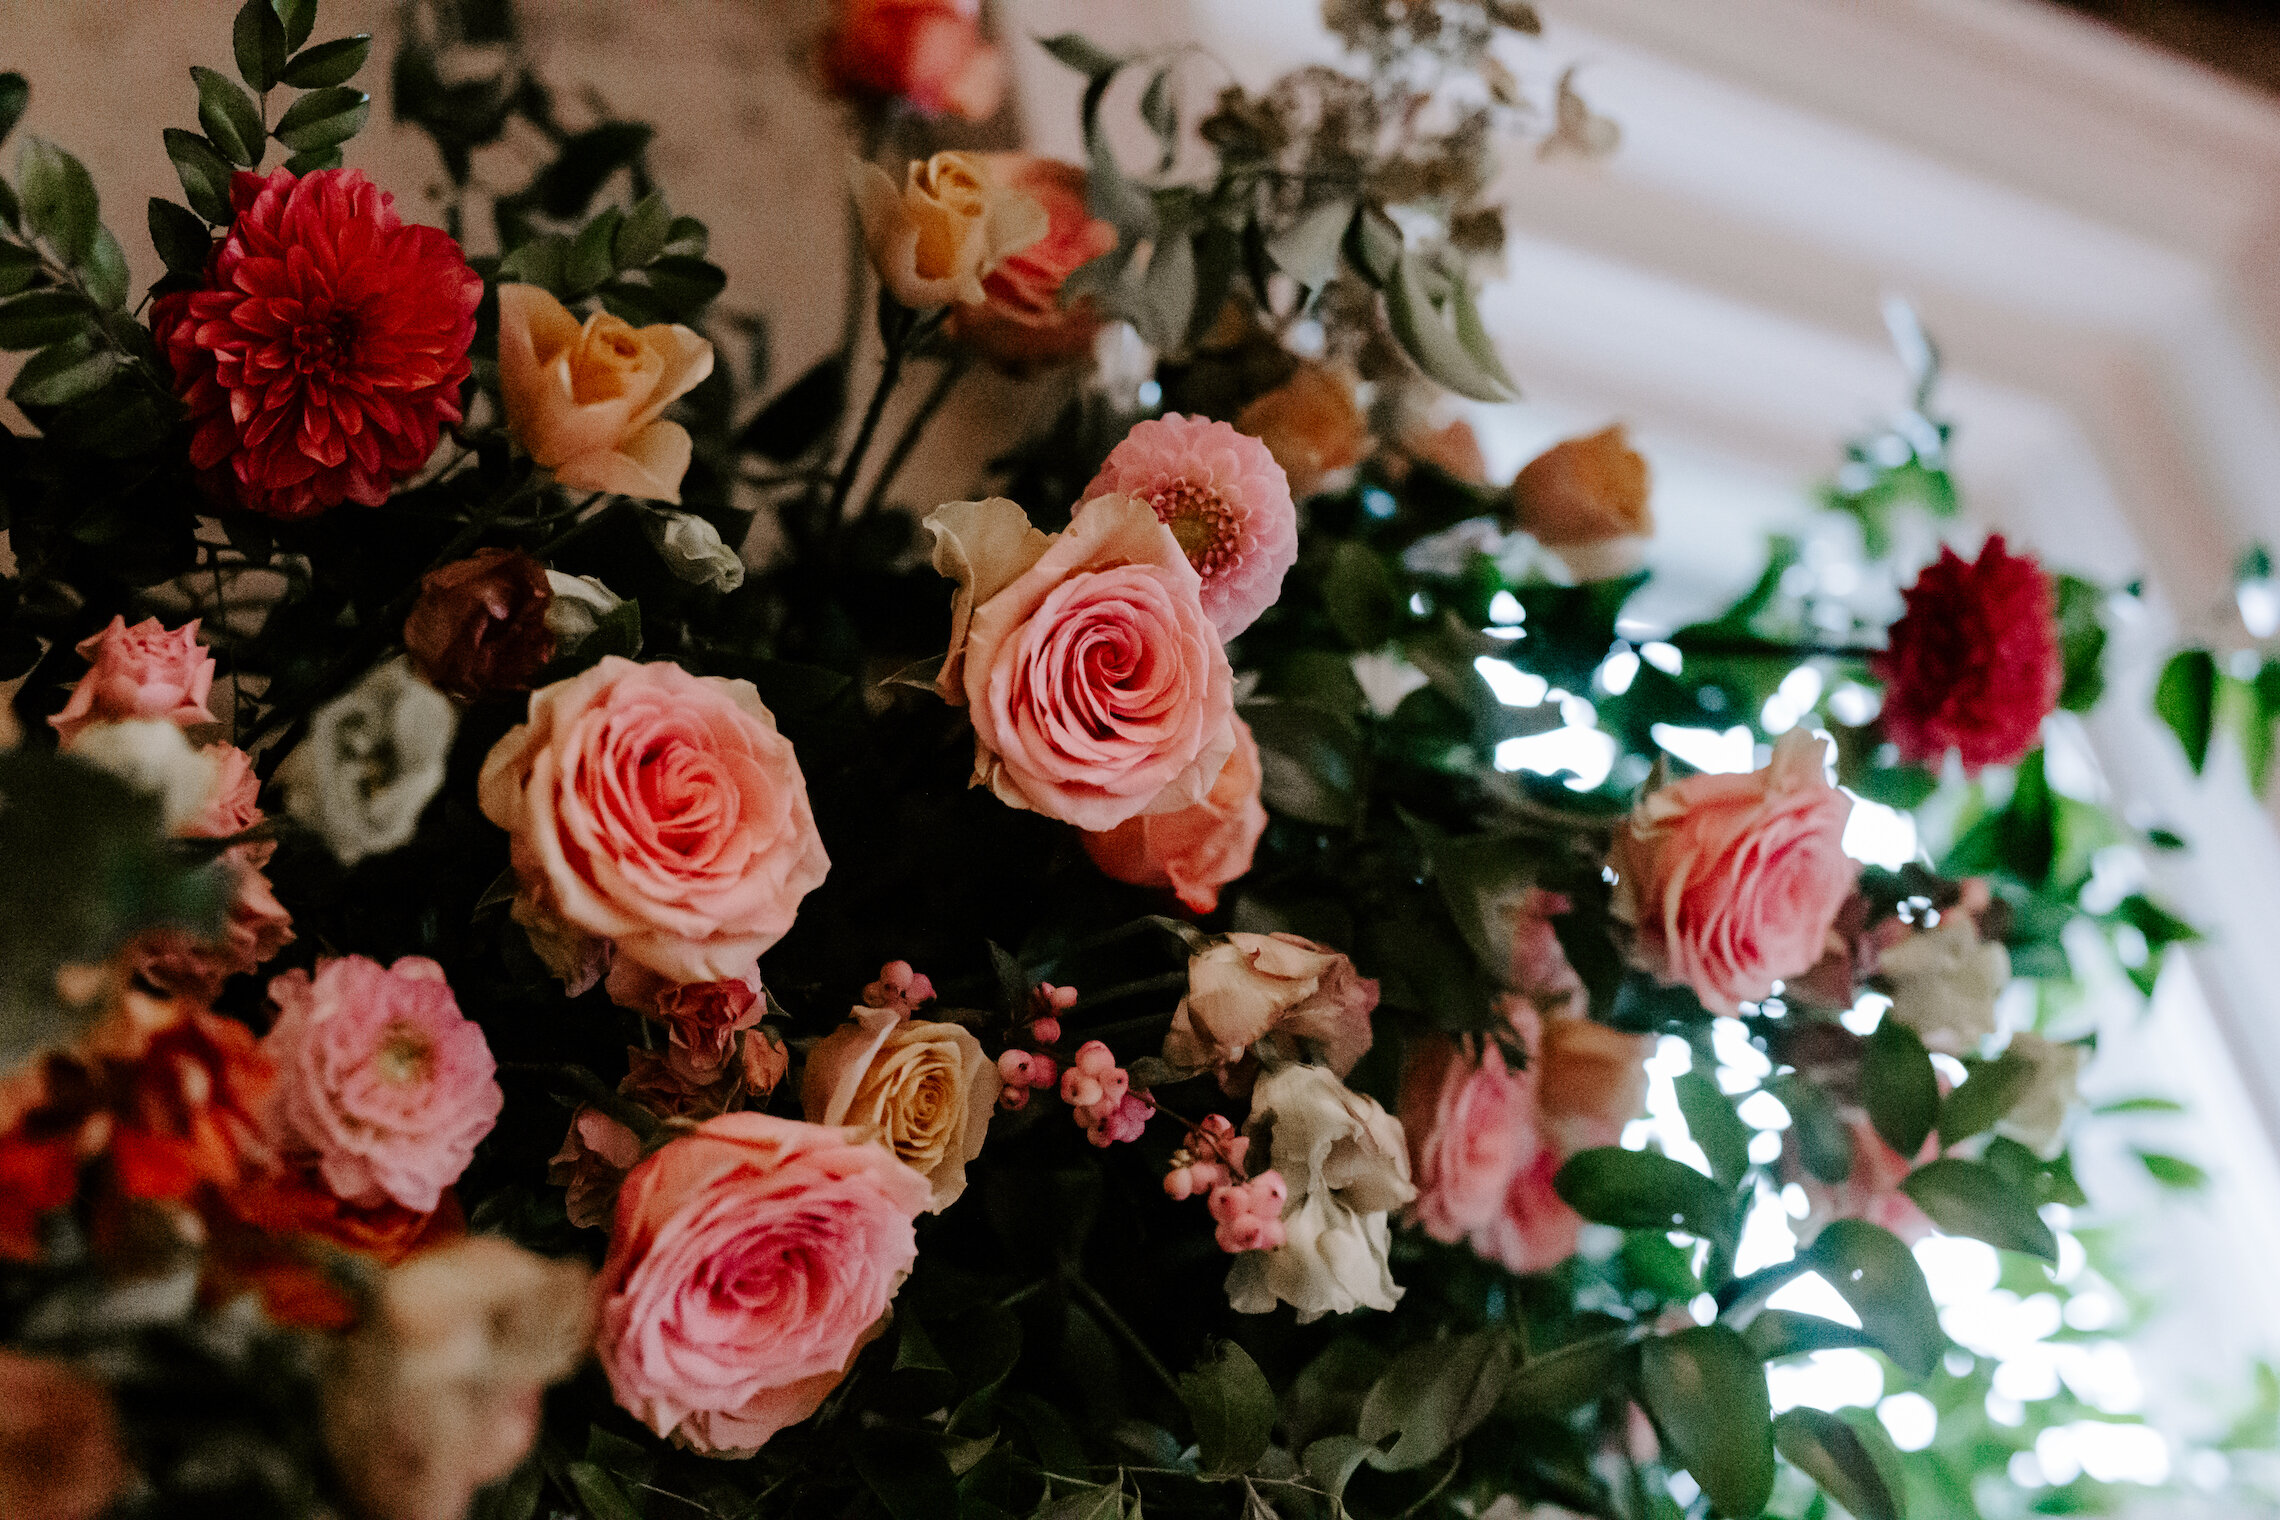 This wedding featured a stunning ceremony arch and a moss and floral wall installation. Blooms used were coral zinnias, fuchsia and blush dahlias, tangerine ranunculus, petal-heavy roses, pink snowberry, and sprawling smilax vine. Designed by Nashvi…